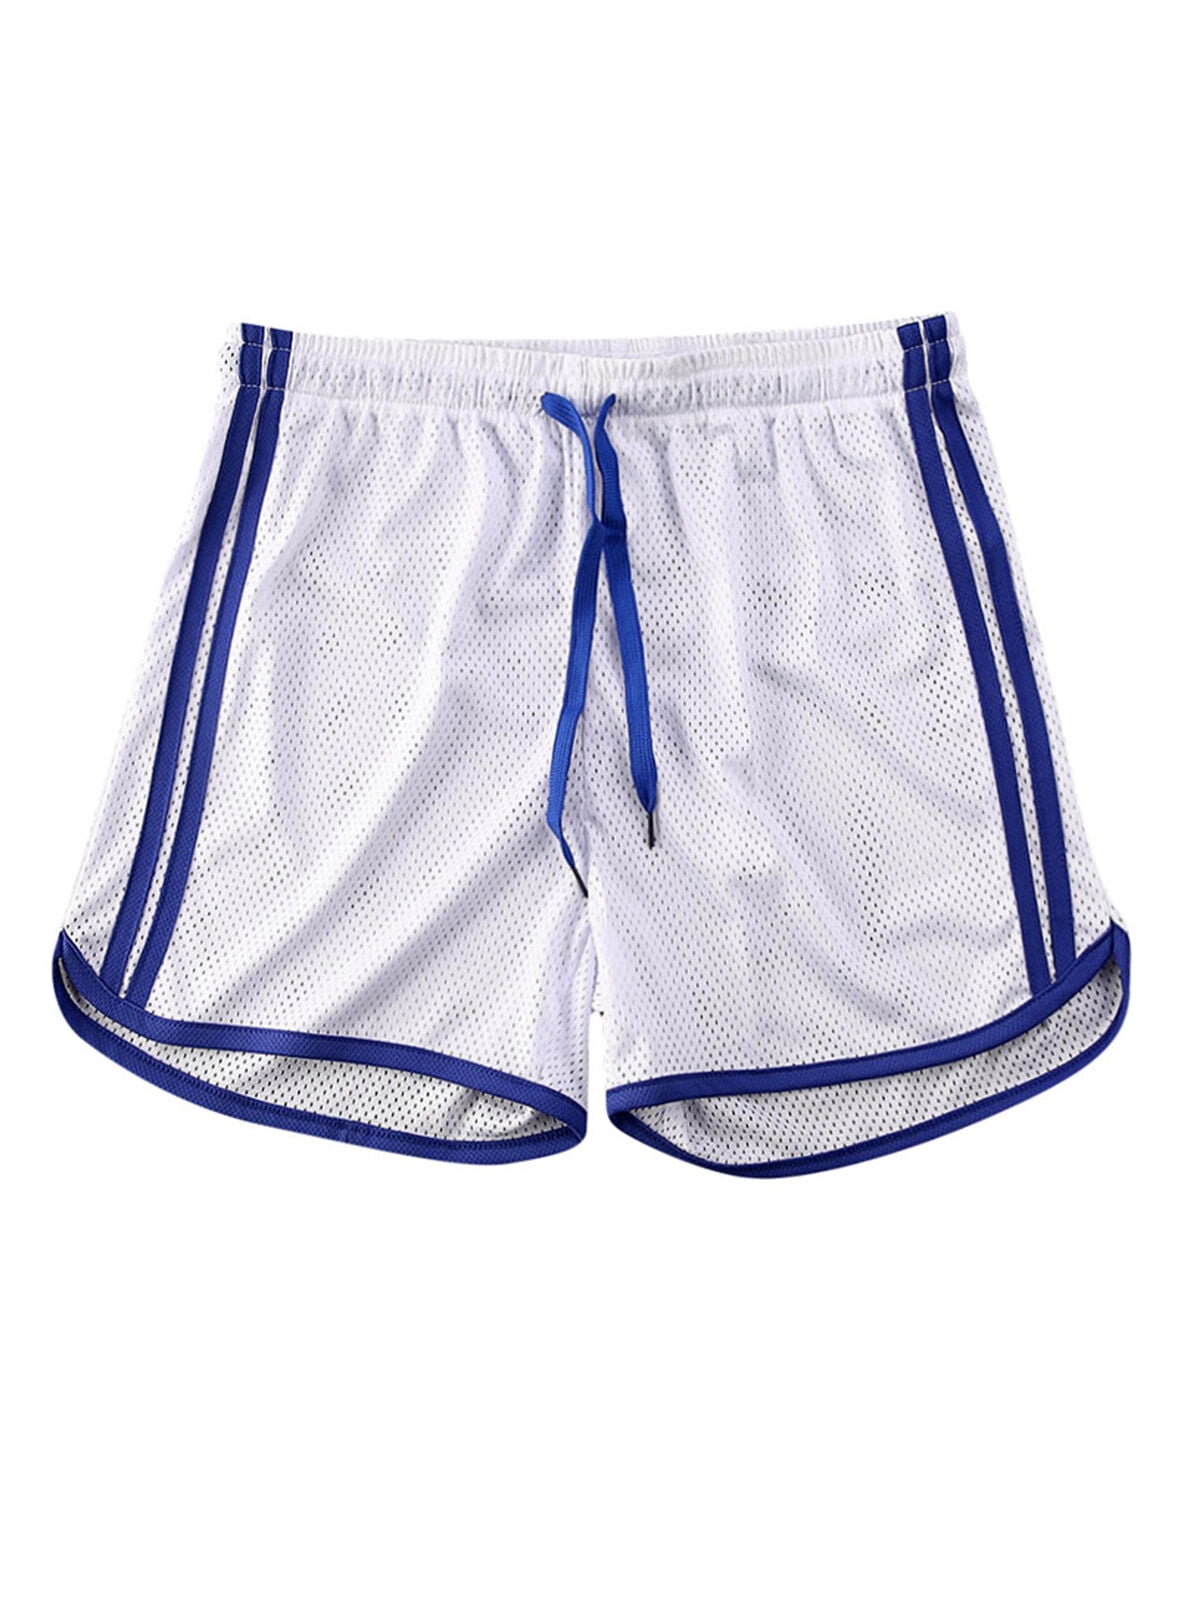 ROOMYDEAL Basketball Sport Shorts Fans Quick Dry Retro Mesh Embroidered Fans Workout Gym Athletic Casual Shorts (Medium, 2)